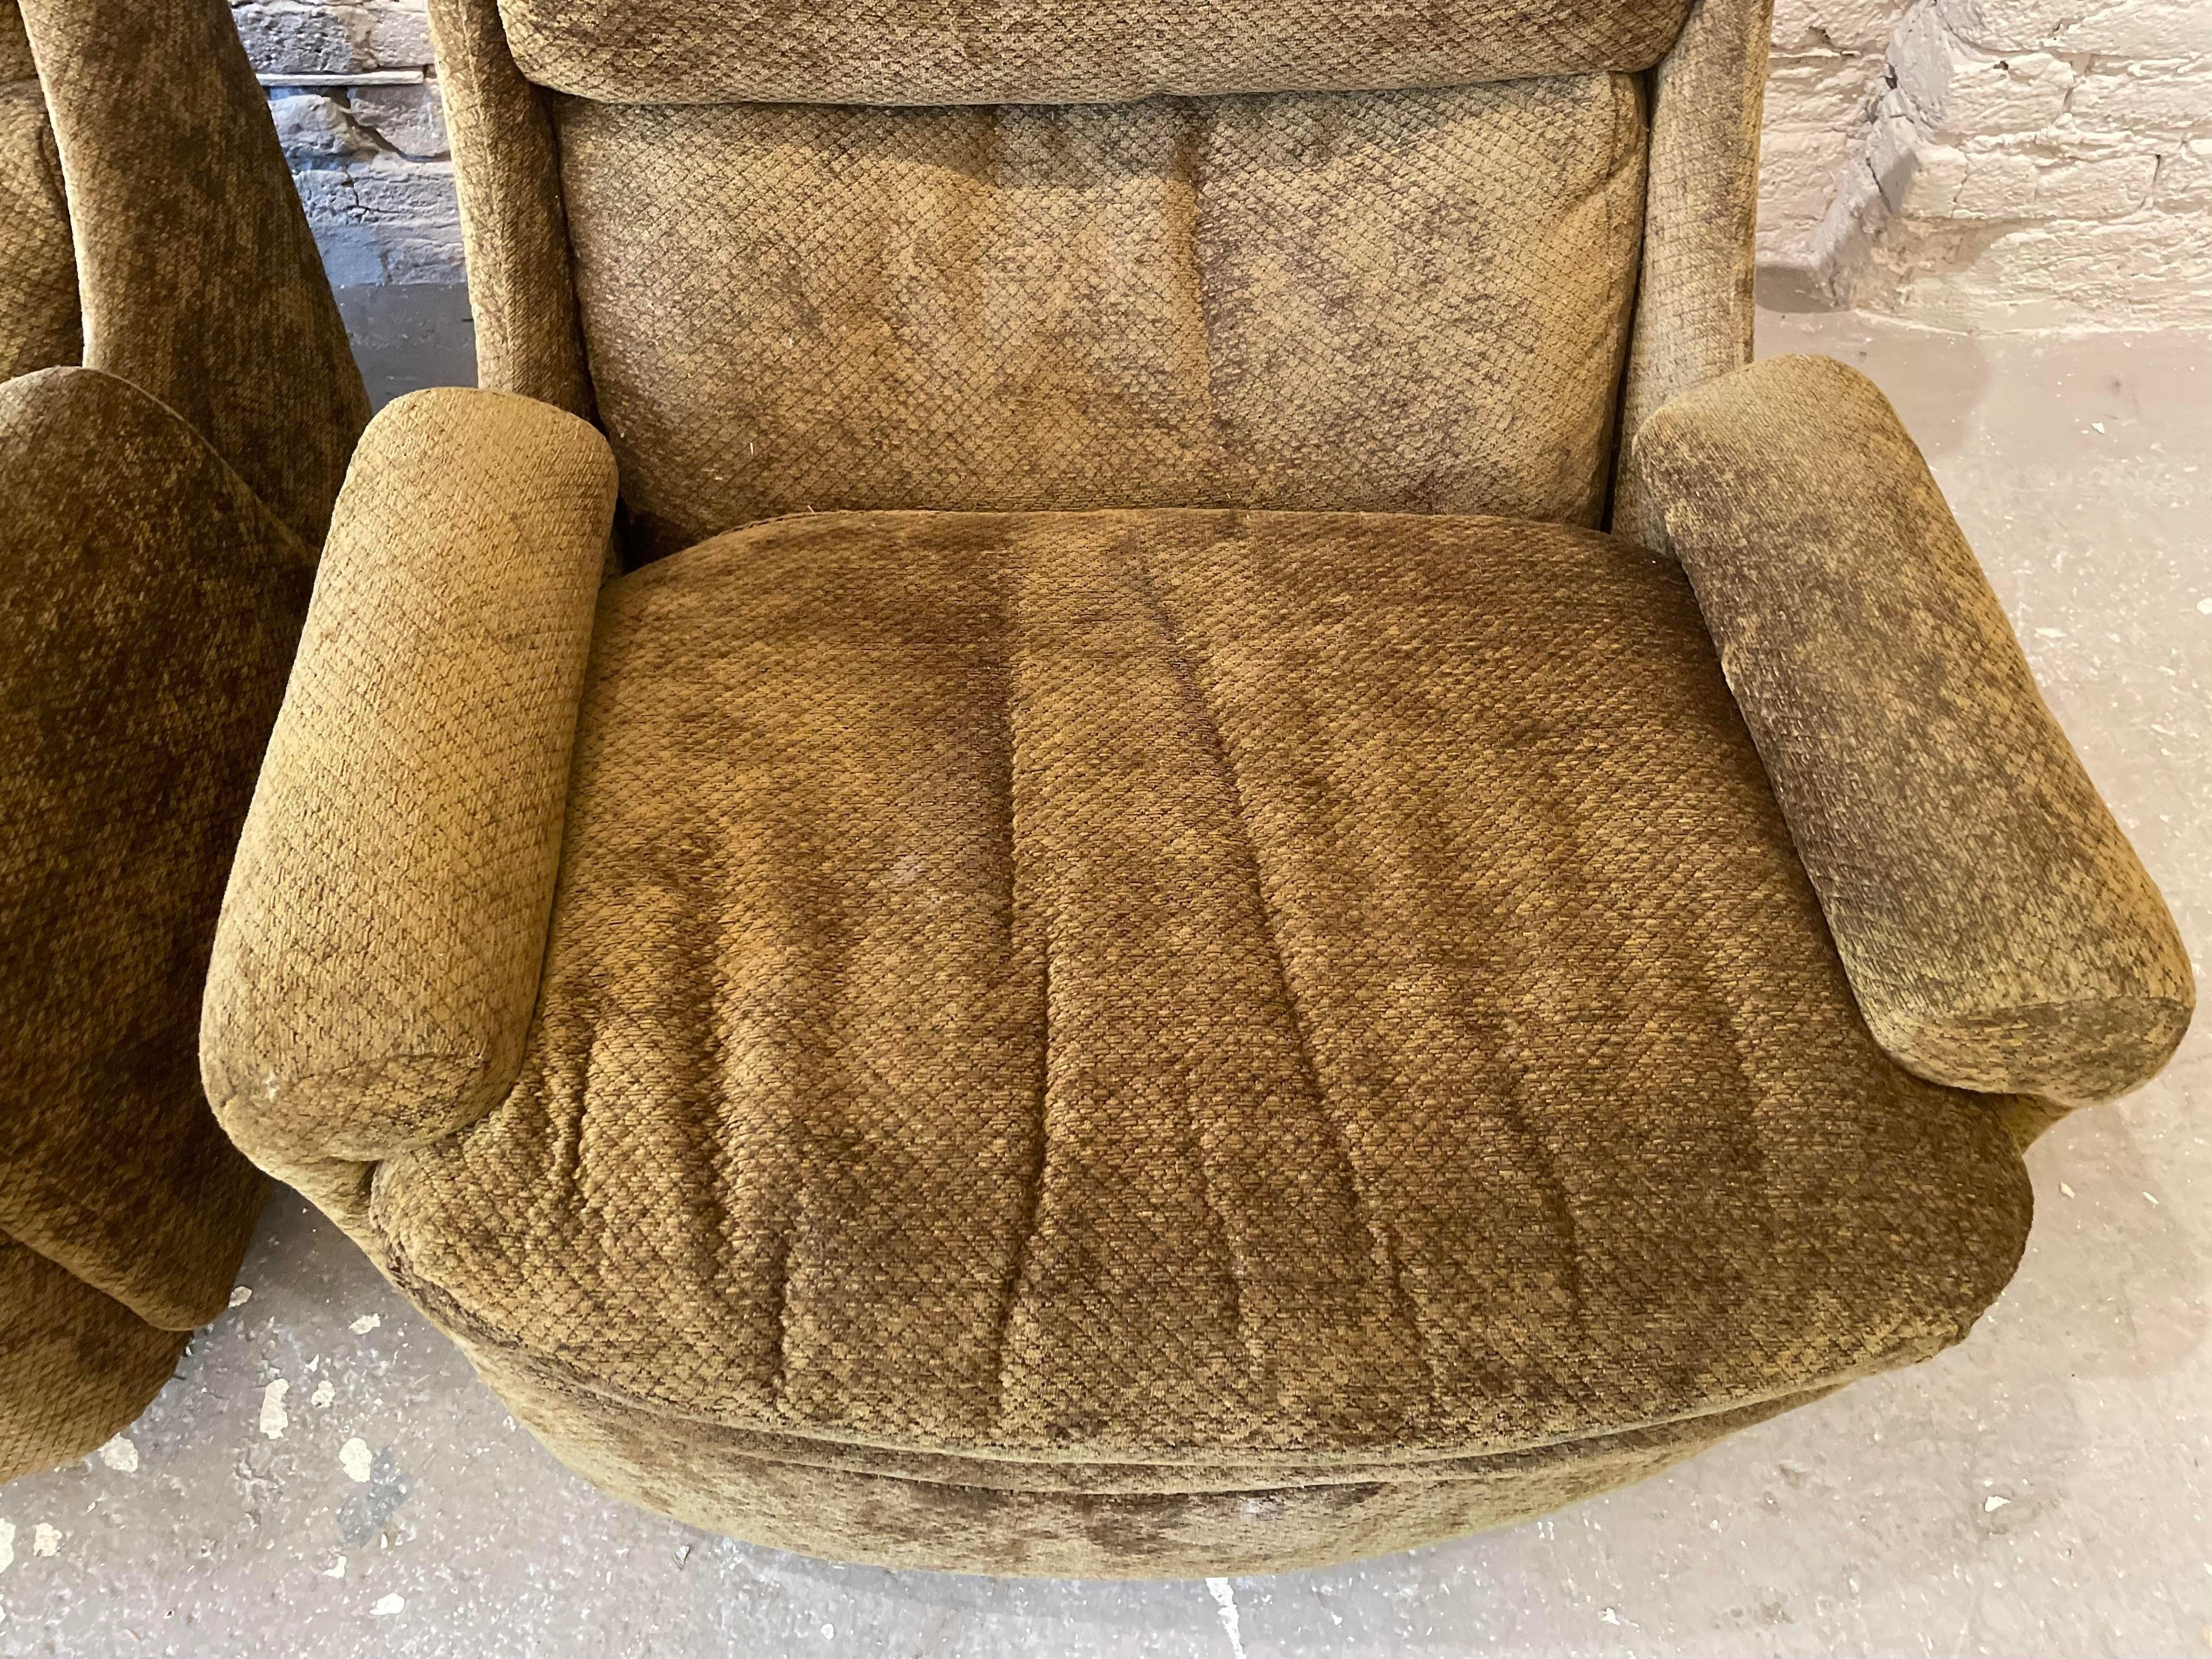 These chairs are incredible. Very heavy with a wooden swivel base in excellent condition. Use as is or redo in glue favorite fabric. 

DIMENSIONS: 32ʺW × 32ʺD × 31ʺH  
STYLES: Modern  
NUMBER OF SEATS: 2  
SEAT HEIGHT: 17.0 in  
PERIOD: 1970s 